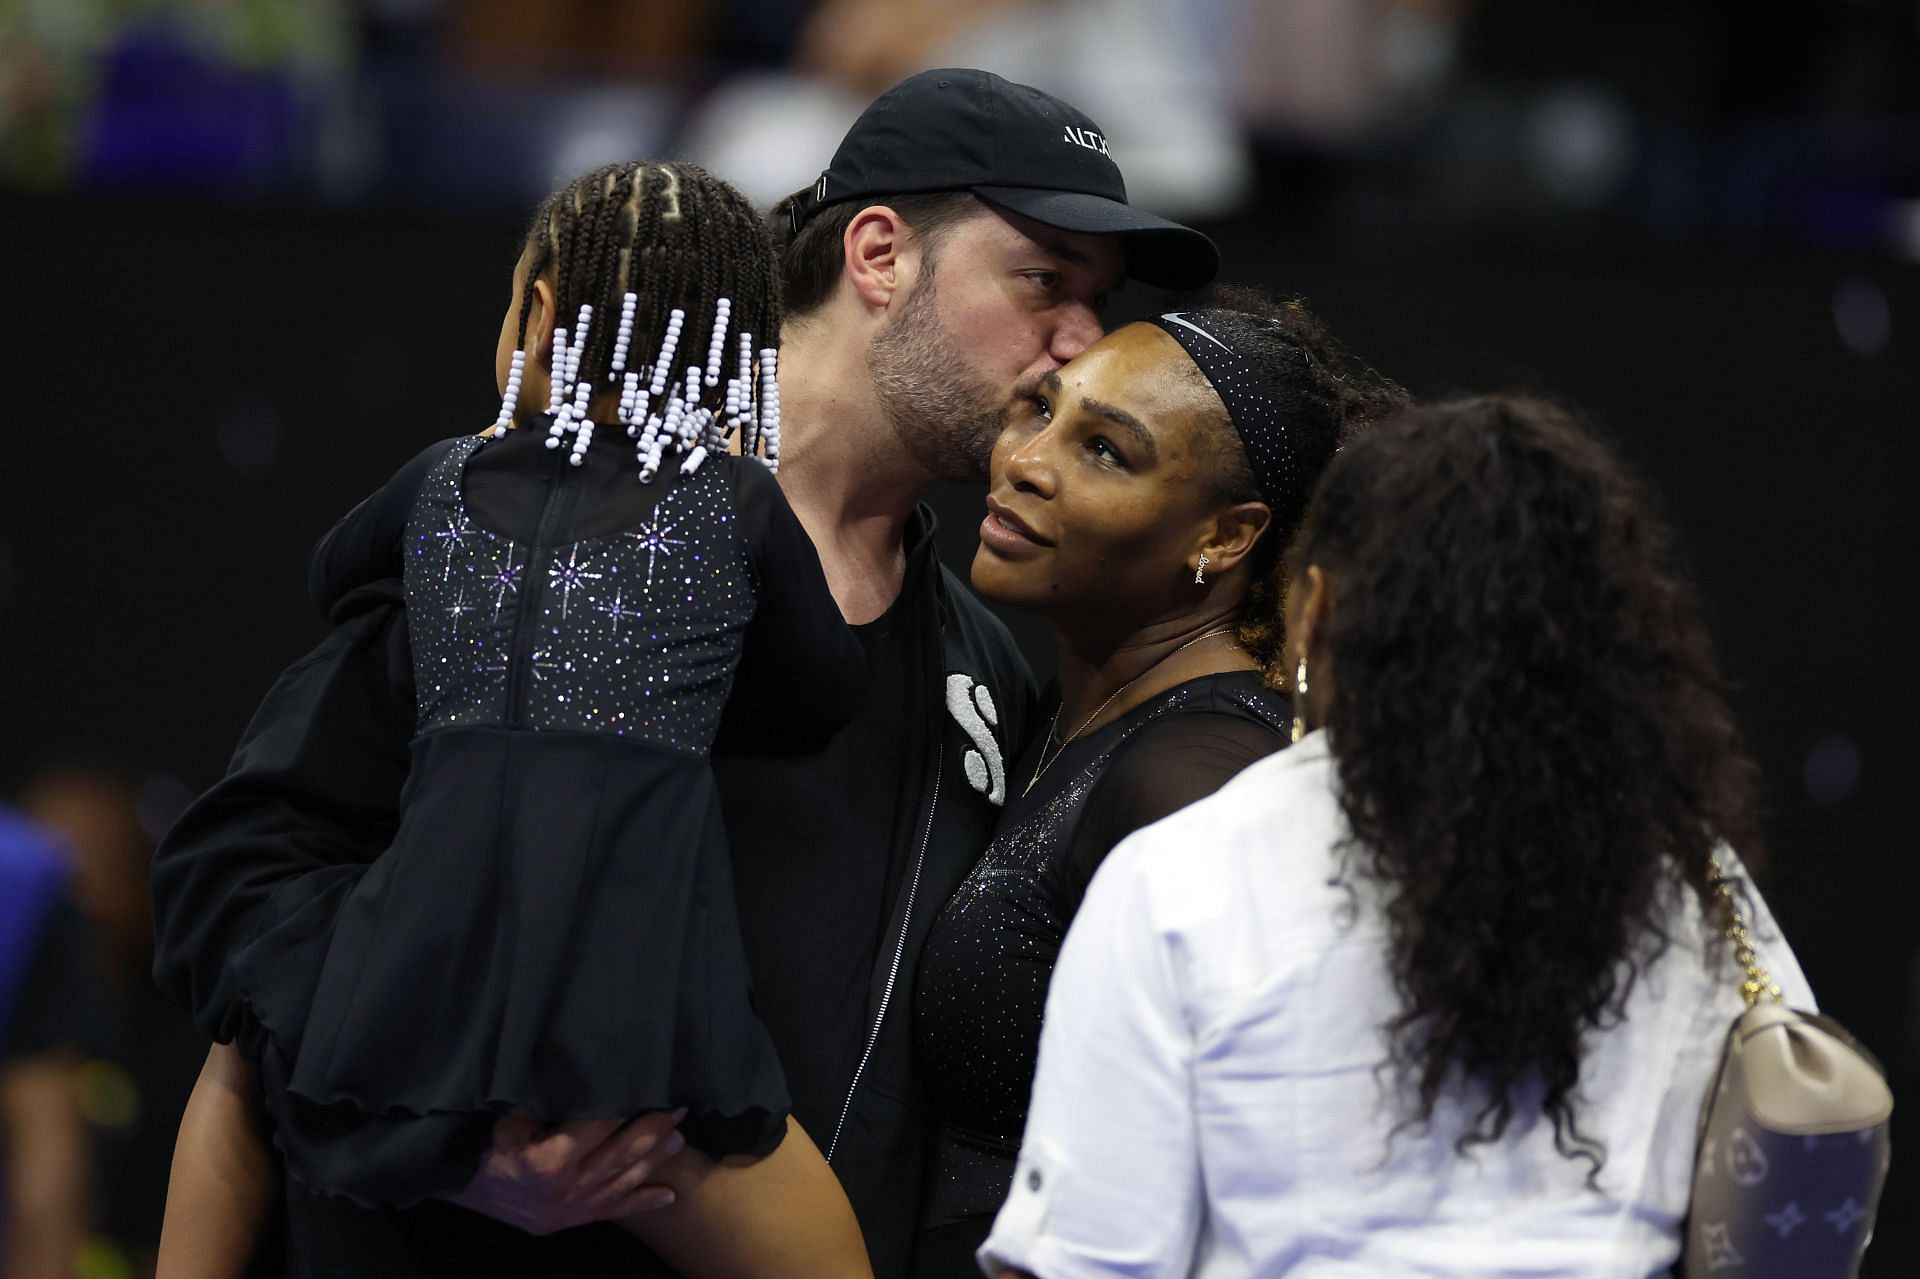 Serena Williams pictured with her husband and daughter at the 2022 US Open.